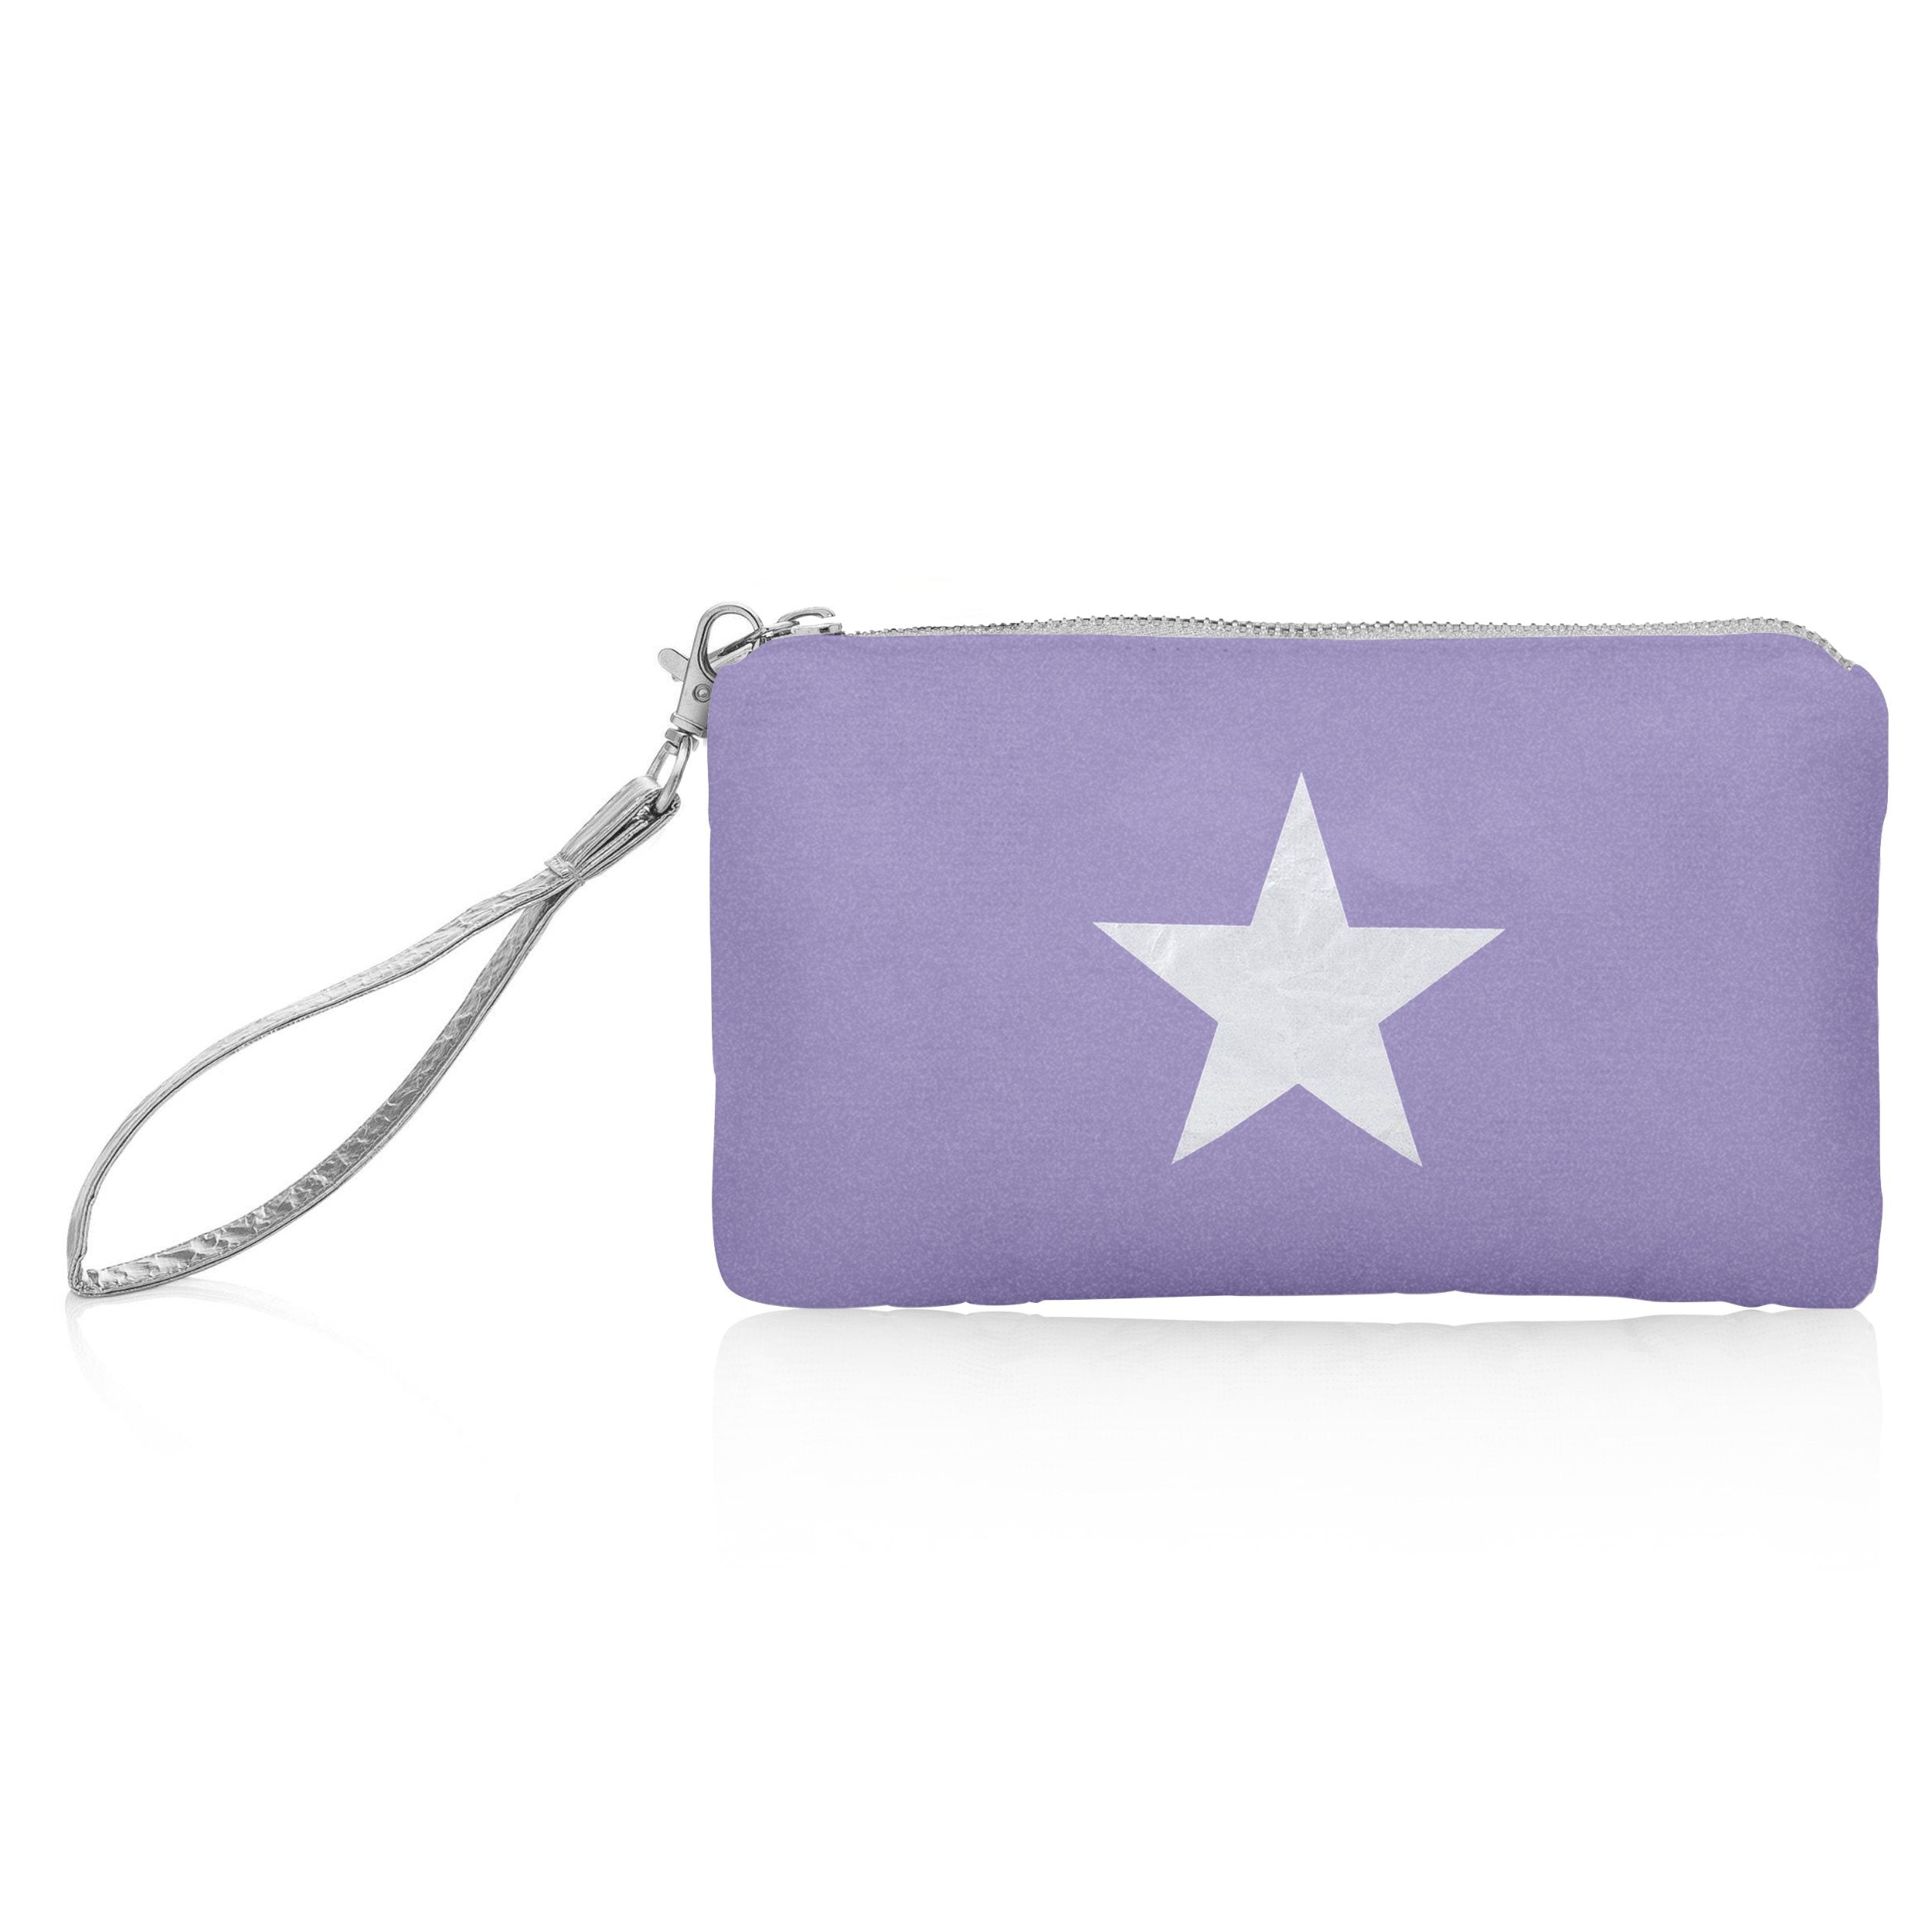 Zip Wristlet or Clutch Purse in Shimmer Purple with Silver Star